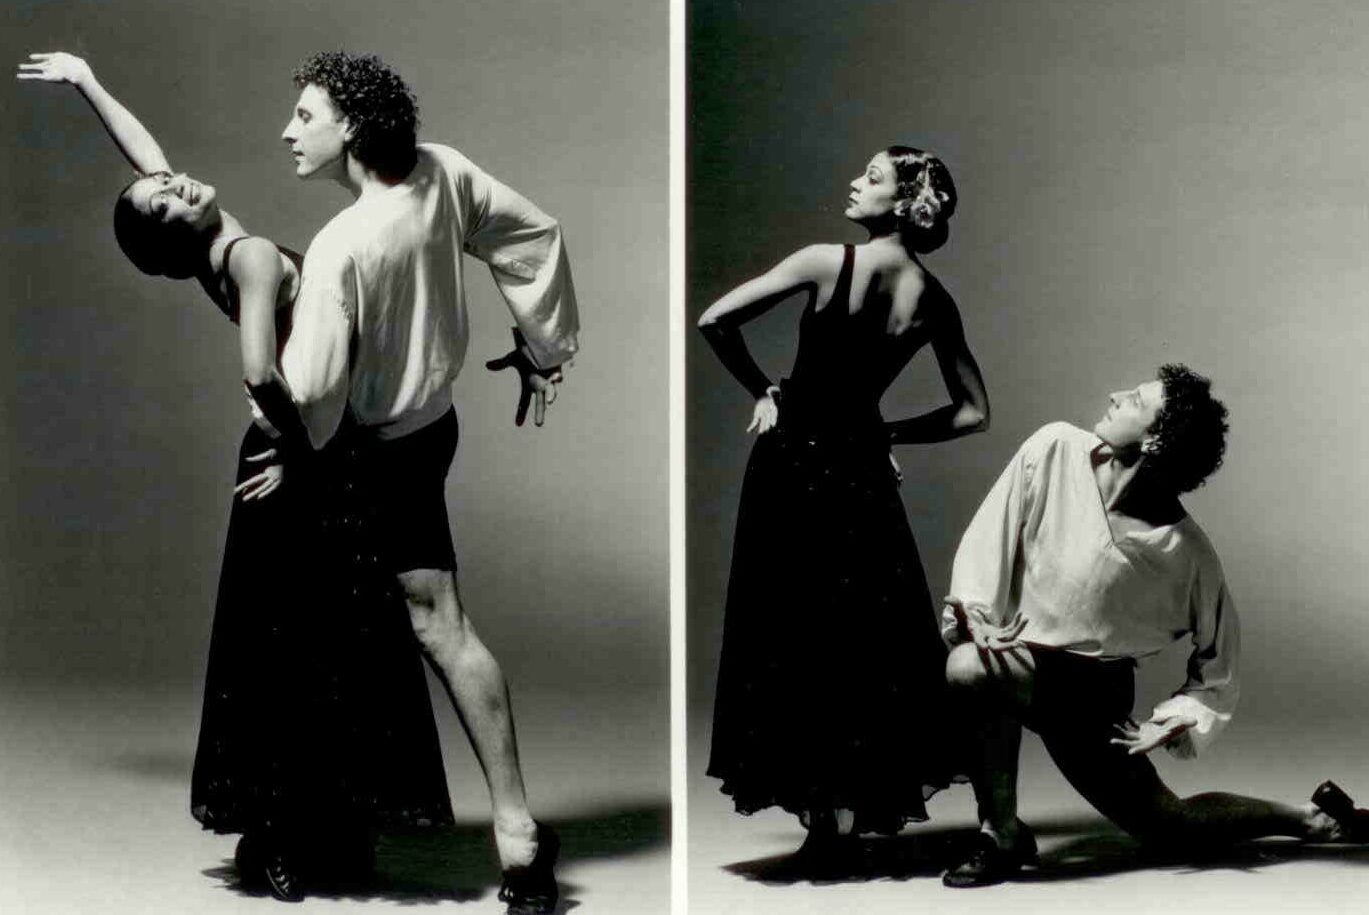 1990s: 2 images with a duet; left dancers embracing, right both look up to high diagonal.